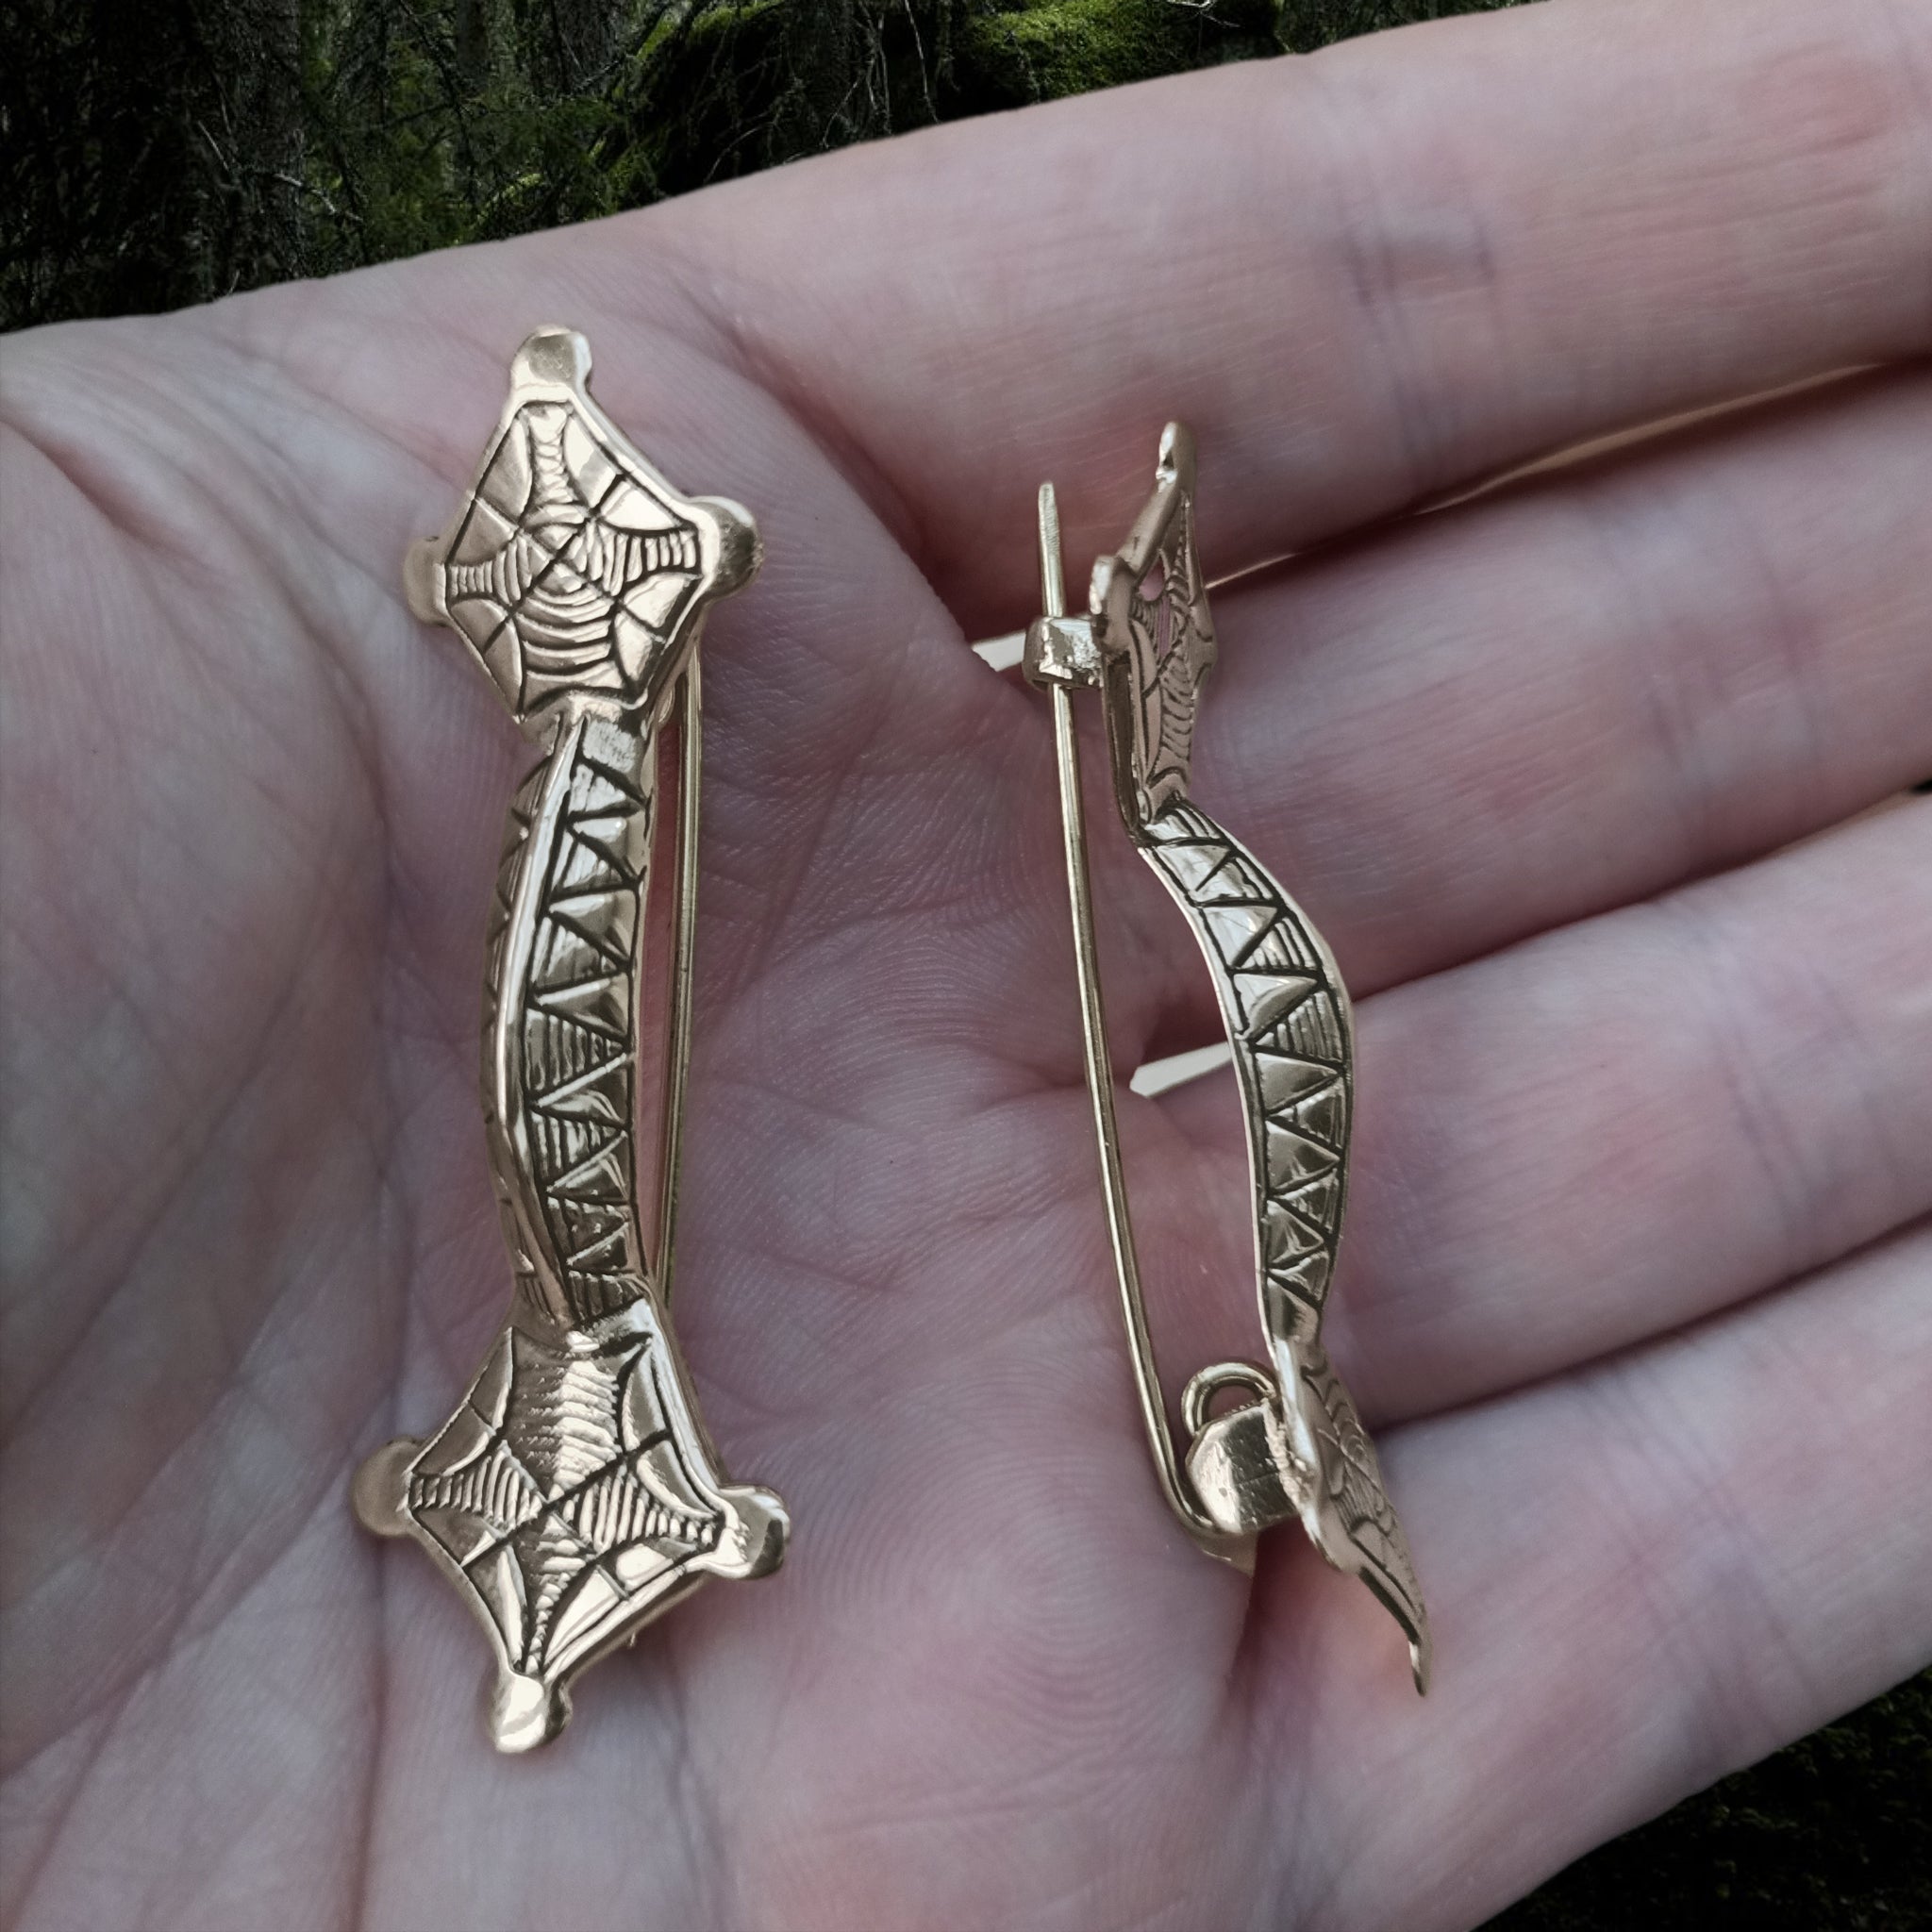 Bronze Viking Mirror Brooches on hand - Front and Side View